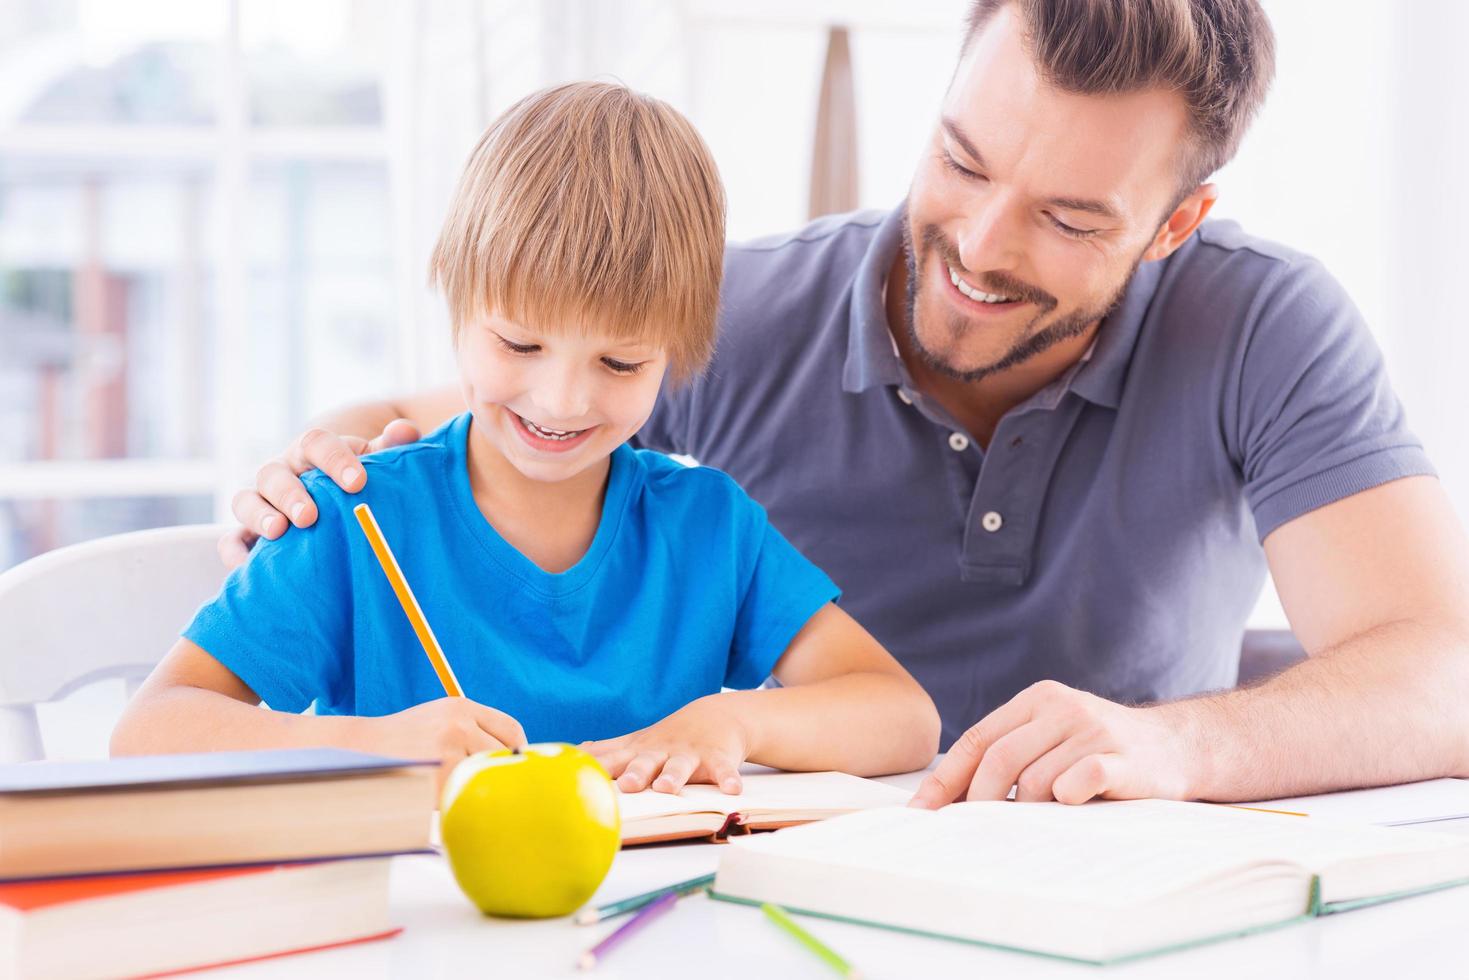 Helping son with schoolwork. Cheerful young father helping his son with homework and smiling while sitting at the table together photo